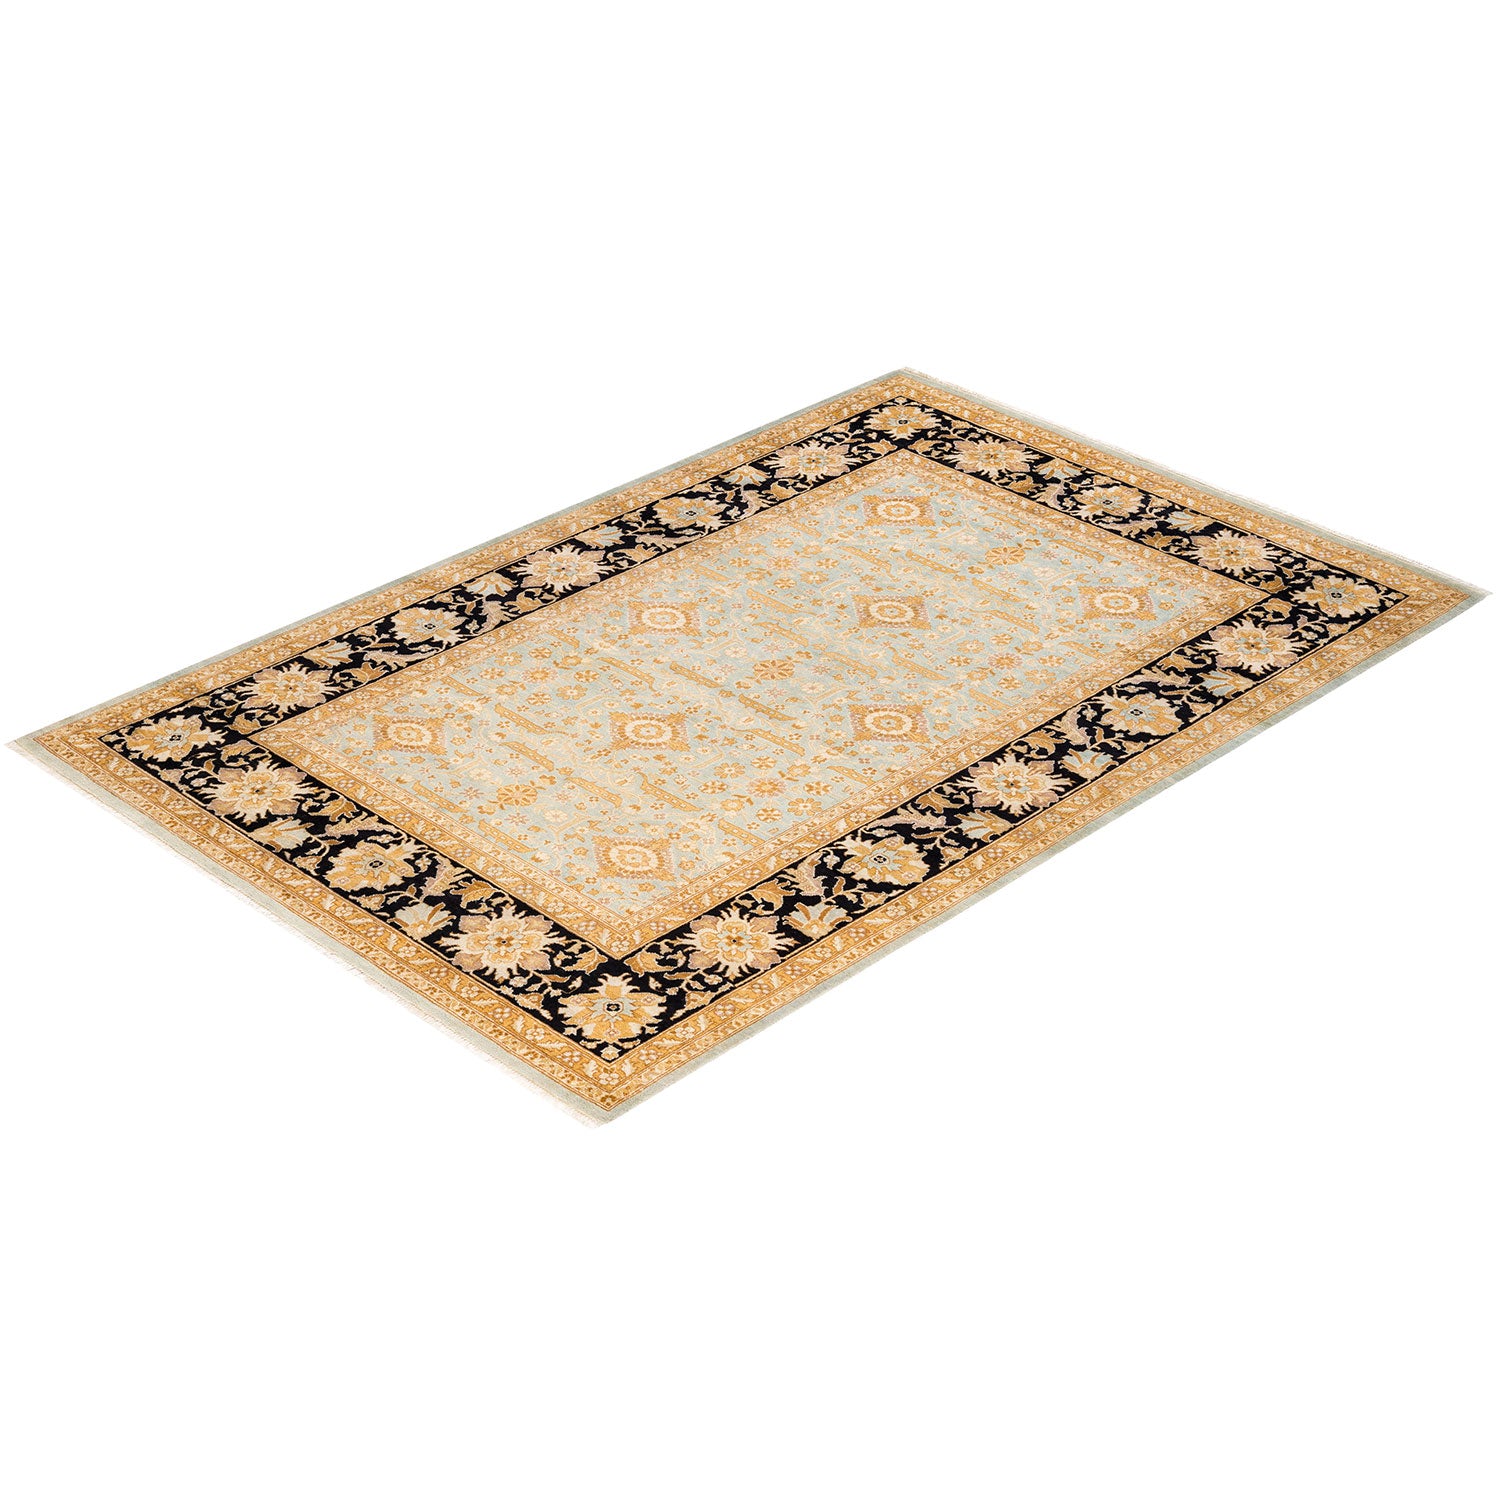 Traditional oriental area rug with intricate floral and geometric patterns